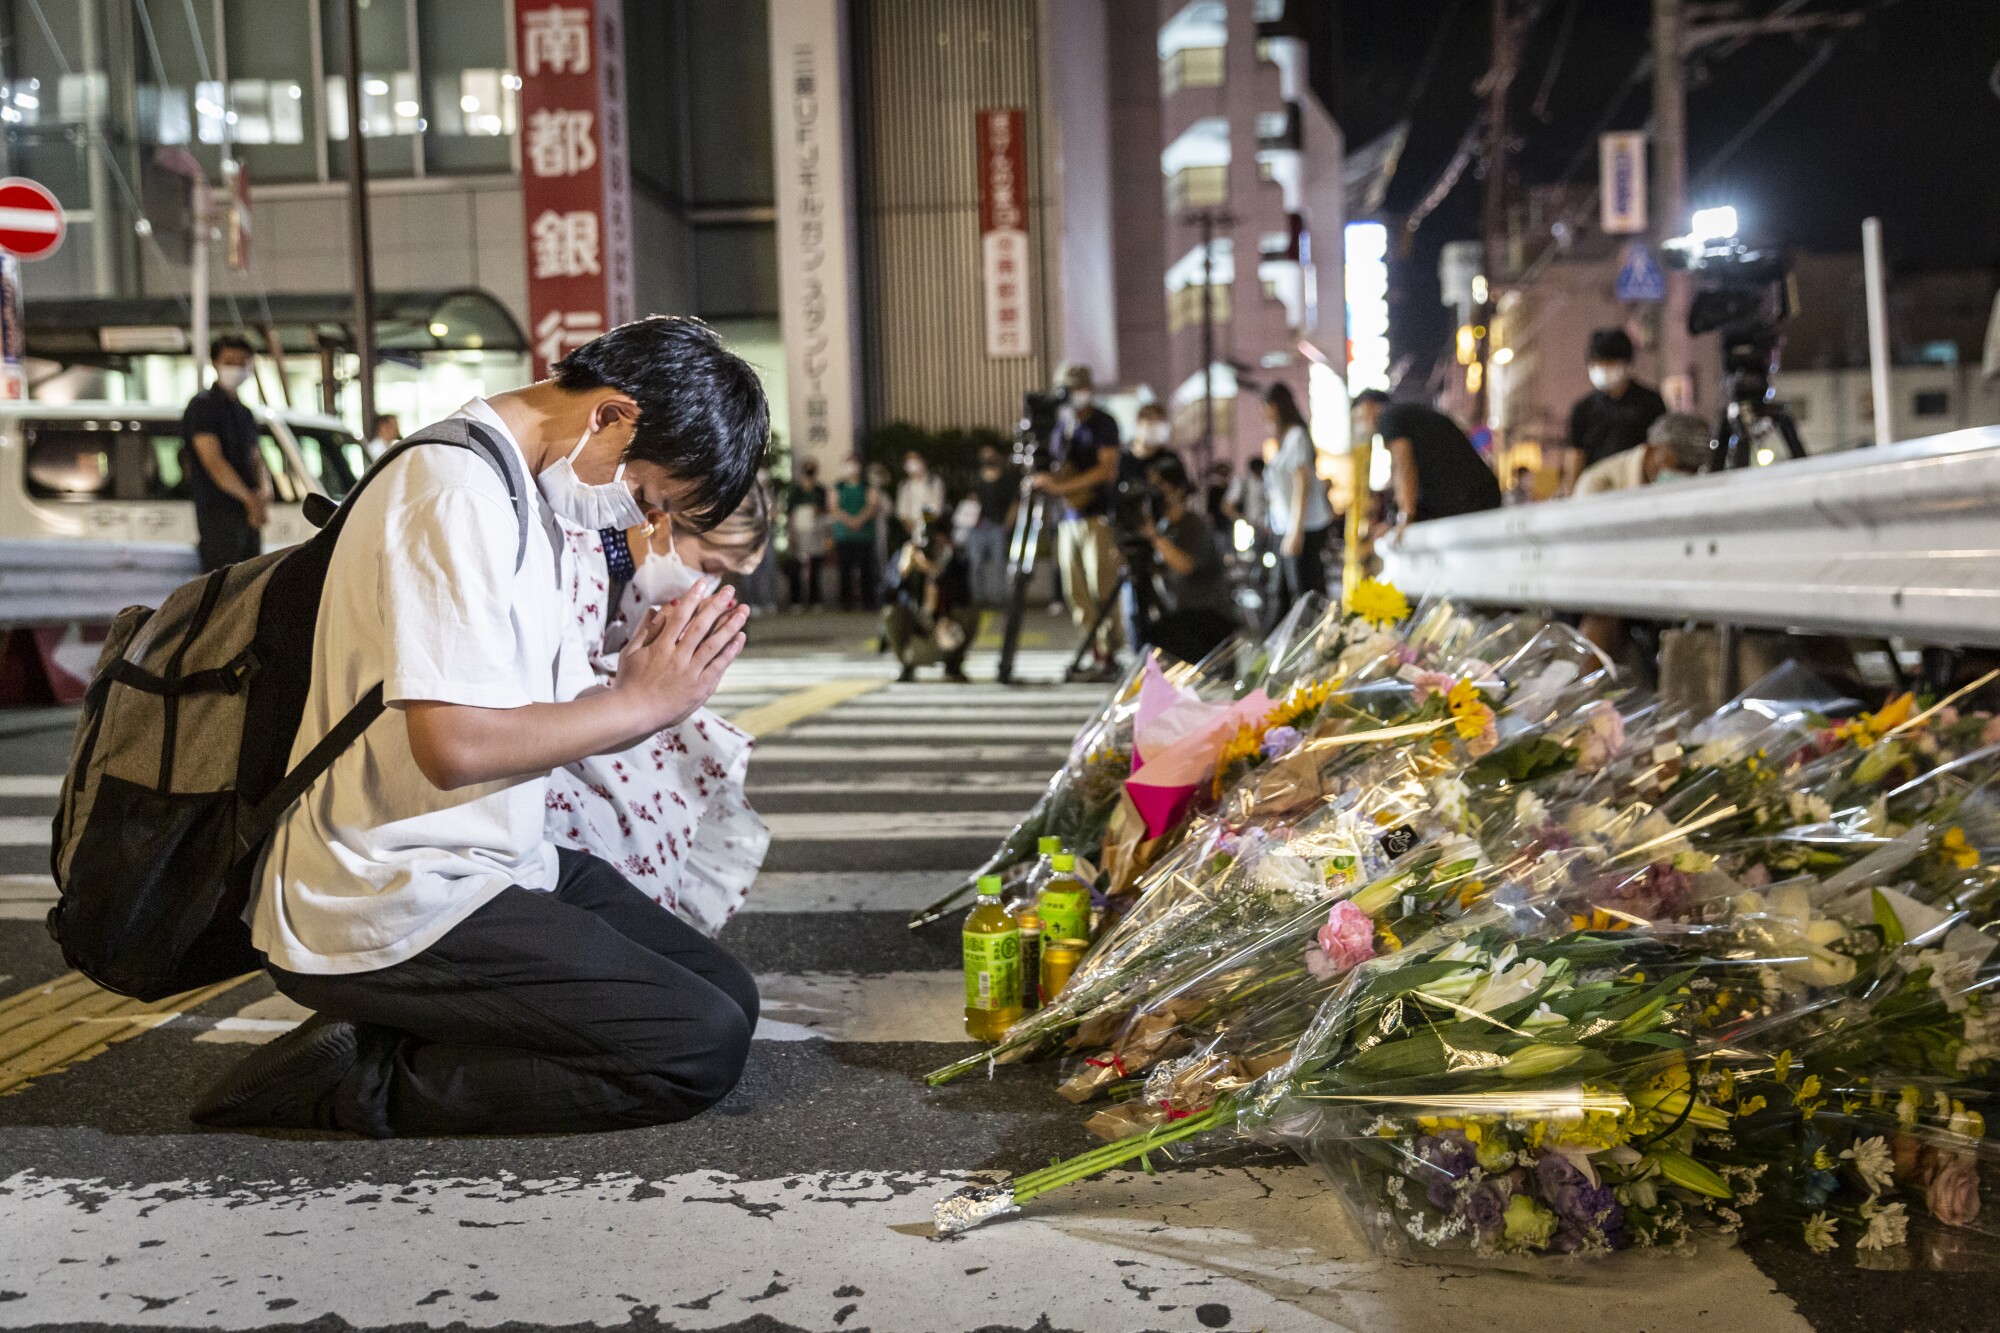 People pray at a site outside of Yamato-Saidaiji Station where Japan’s former prime minister Shinzo Abe was shot